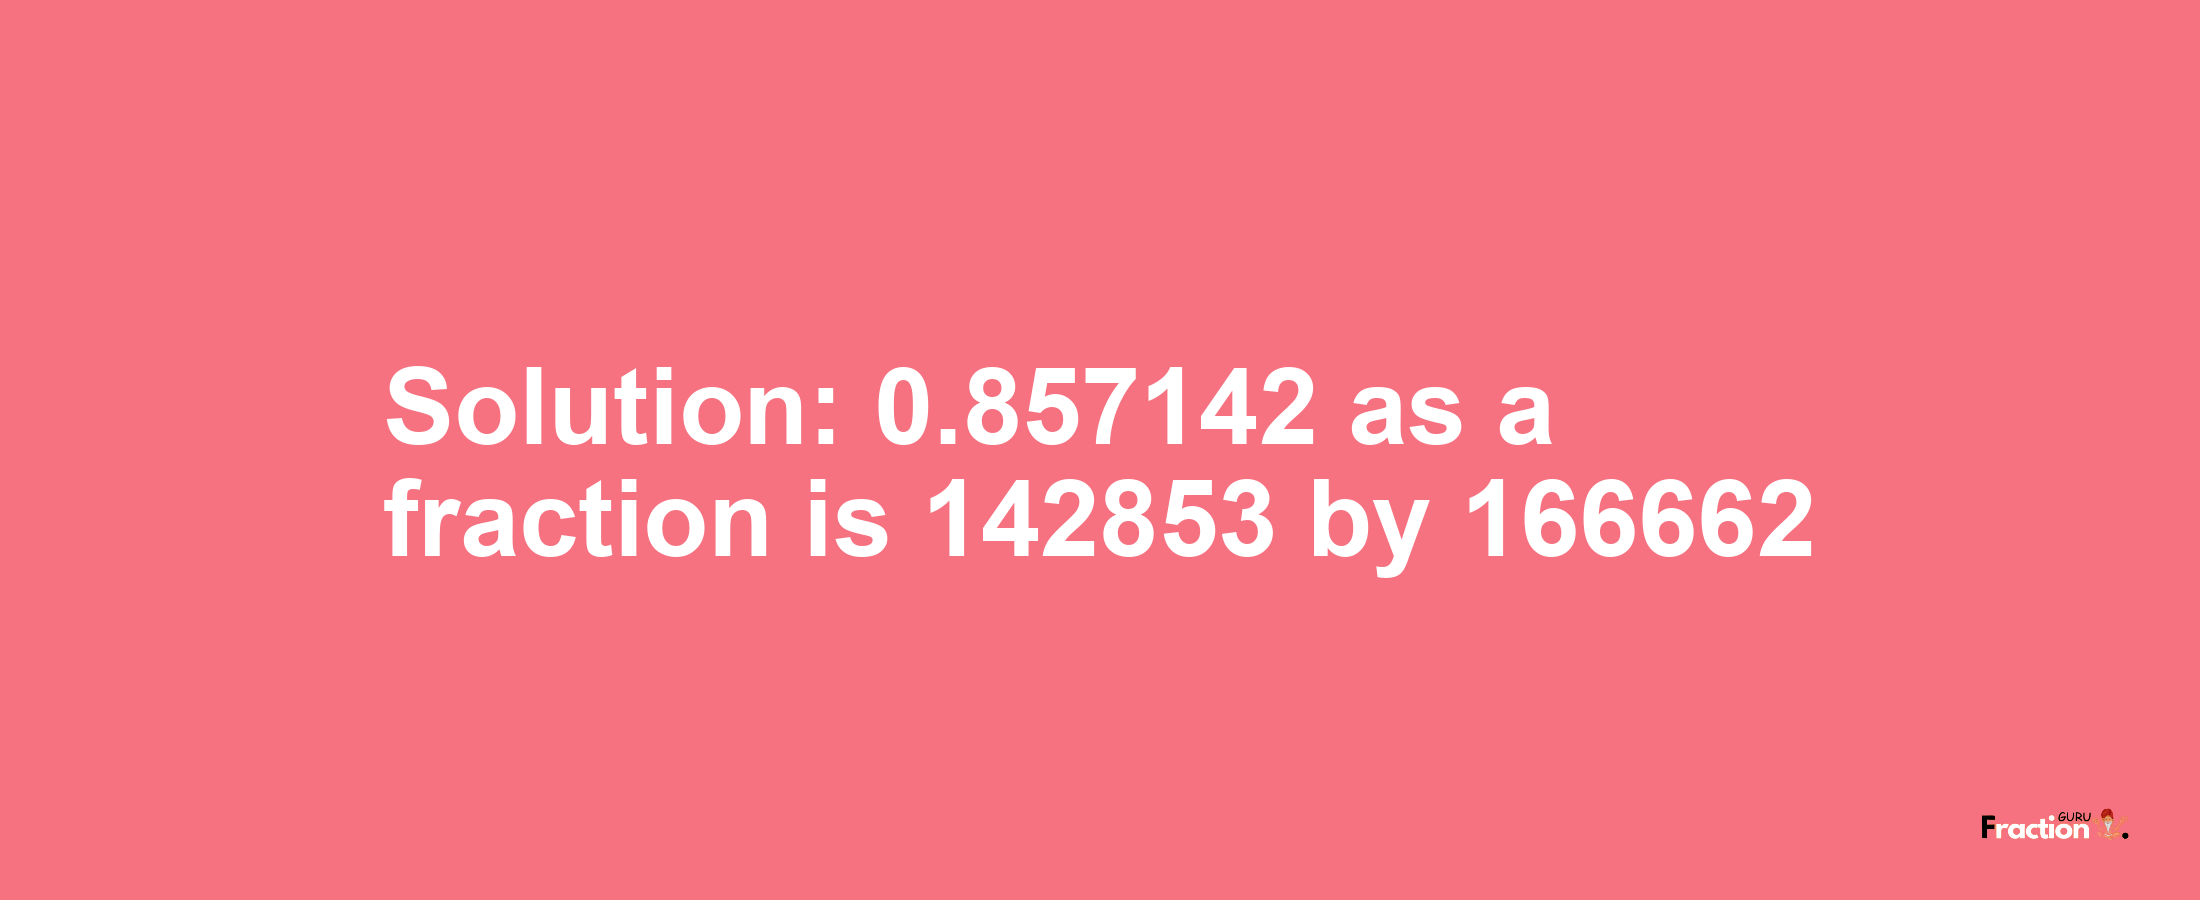 Solution:0.857142 as a fraction is 142853/166662